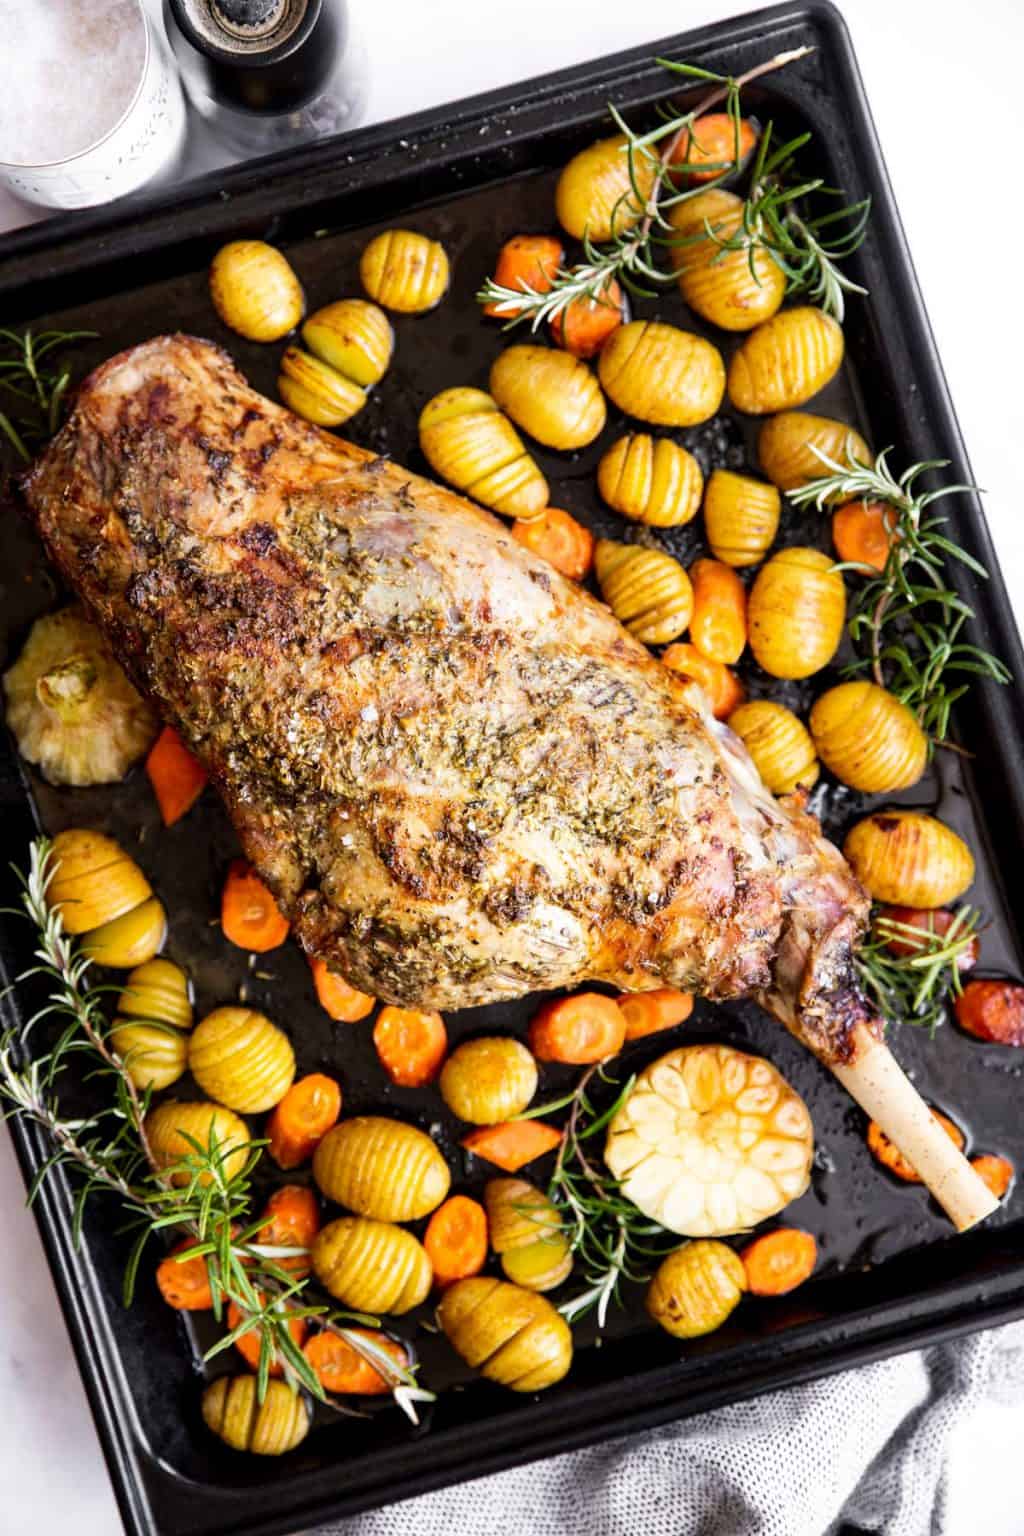 Oven Roasted Leg of Lamb Recipe [+ Video] - Savory Nothings